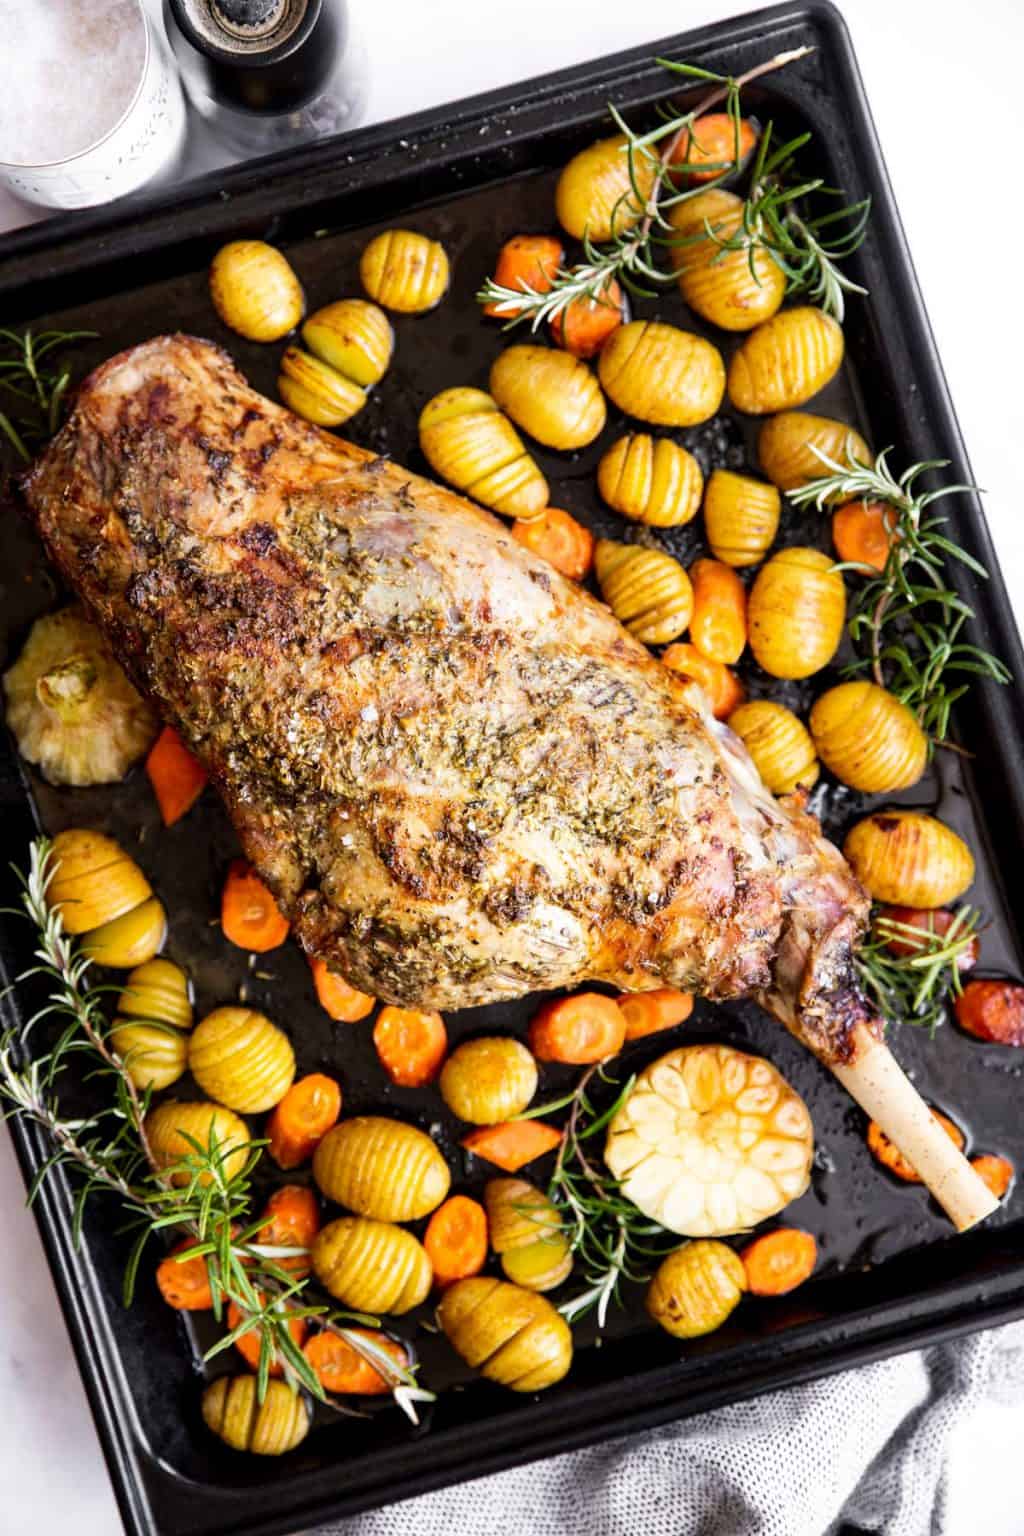 Oven Roasted Leg of Lamb Recipe [+ Video] - Savory Nothings